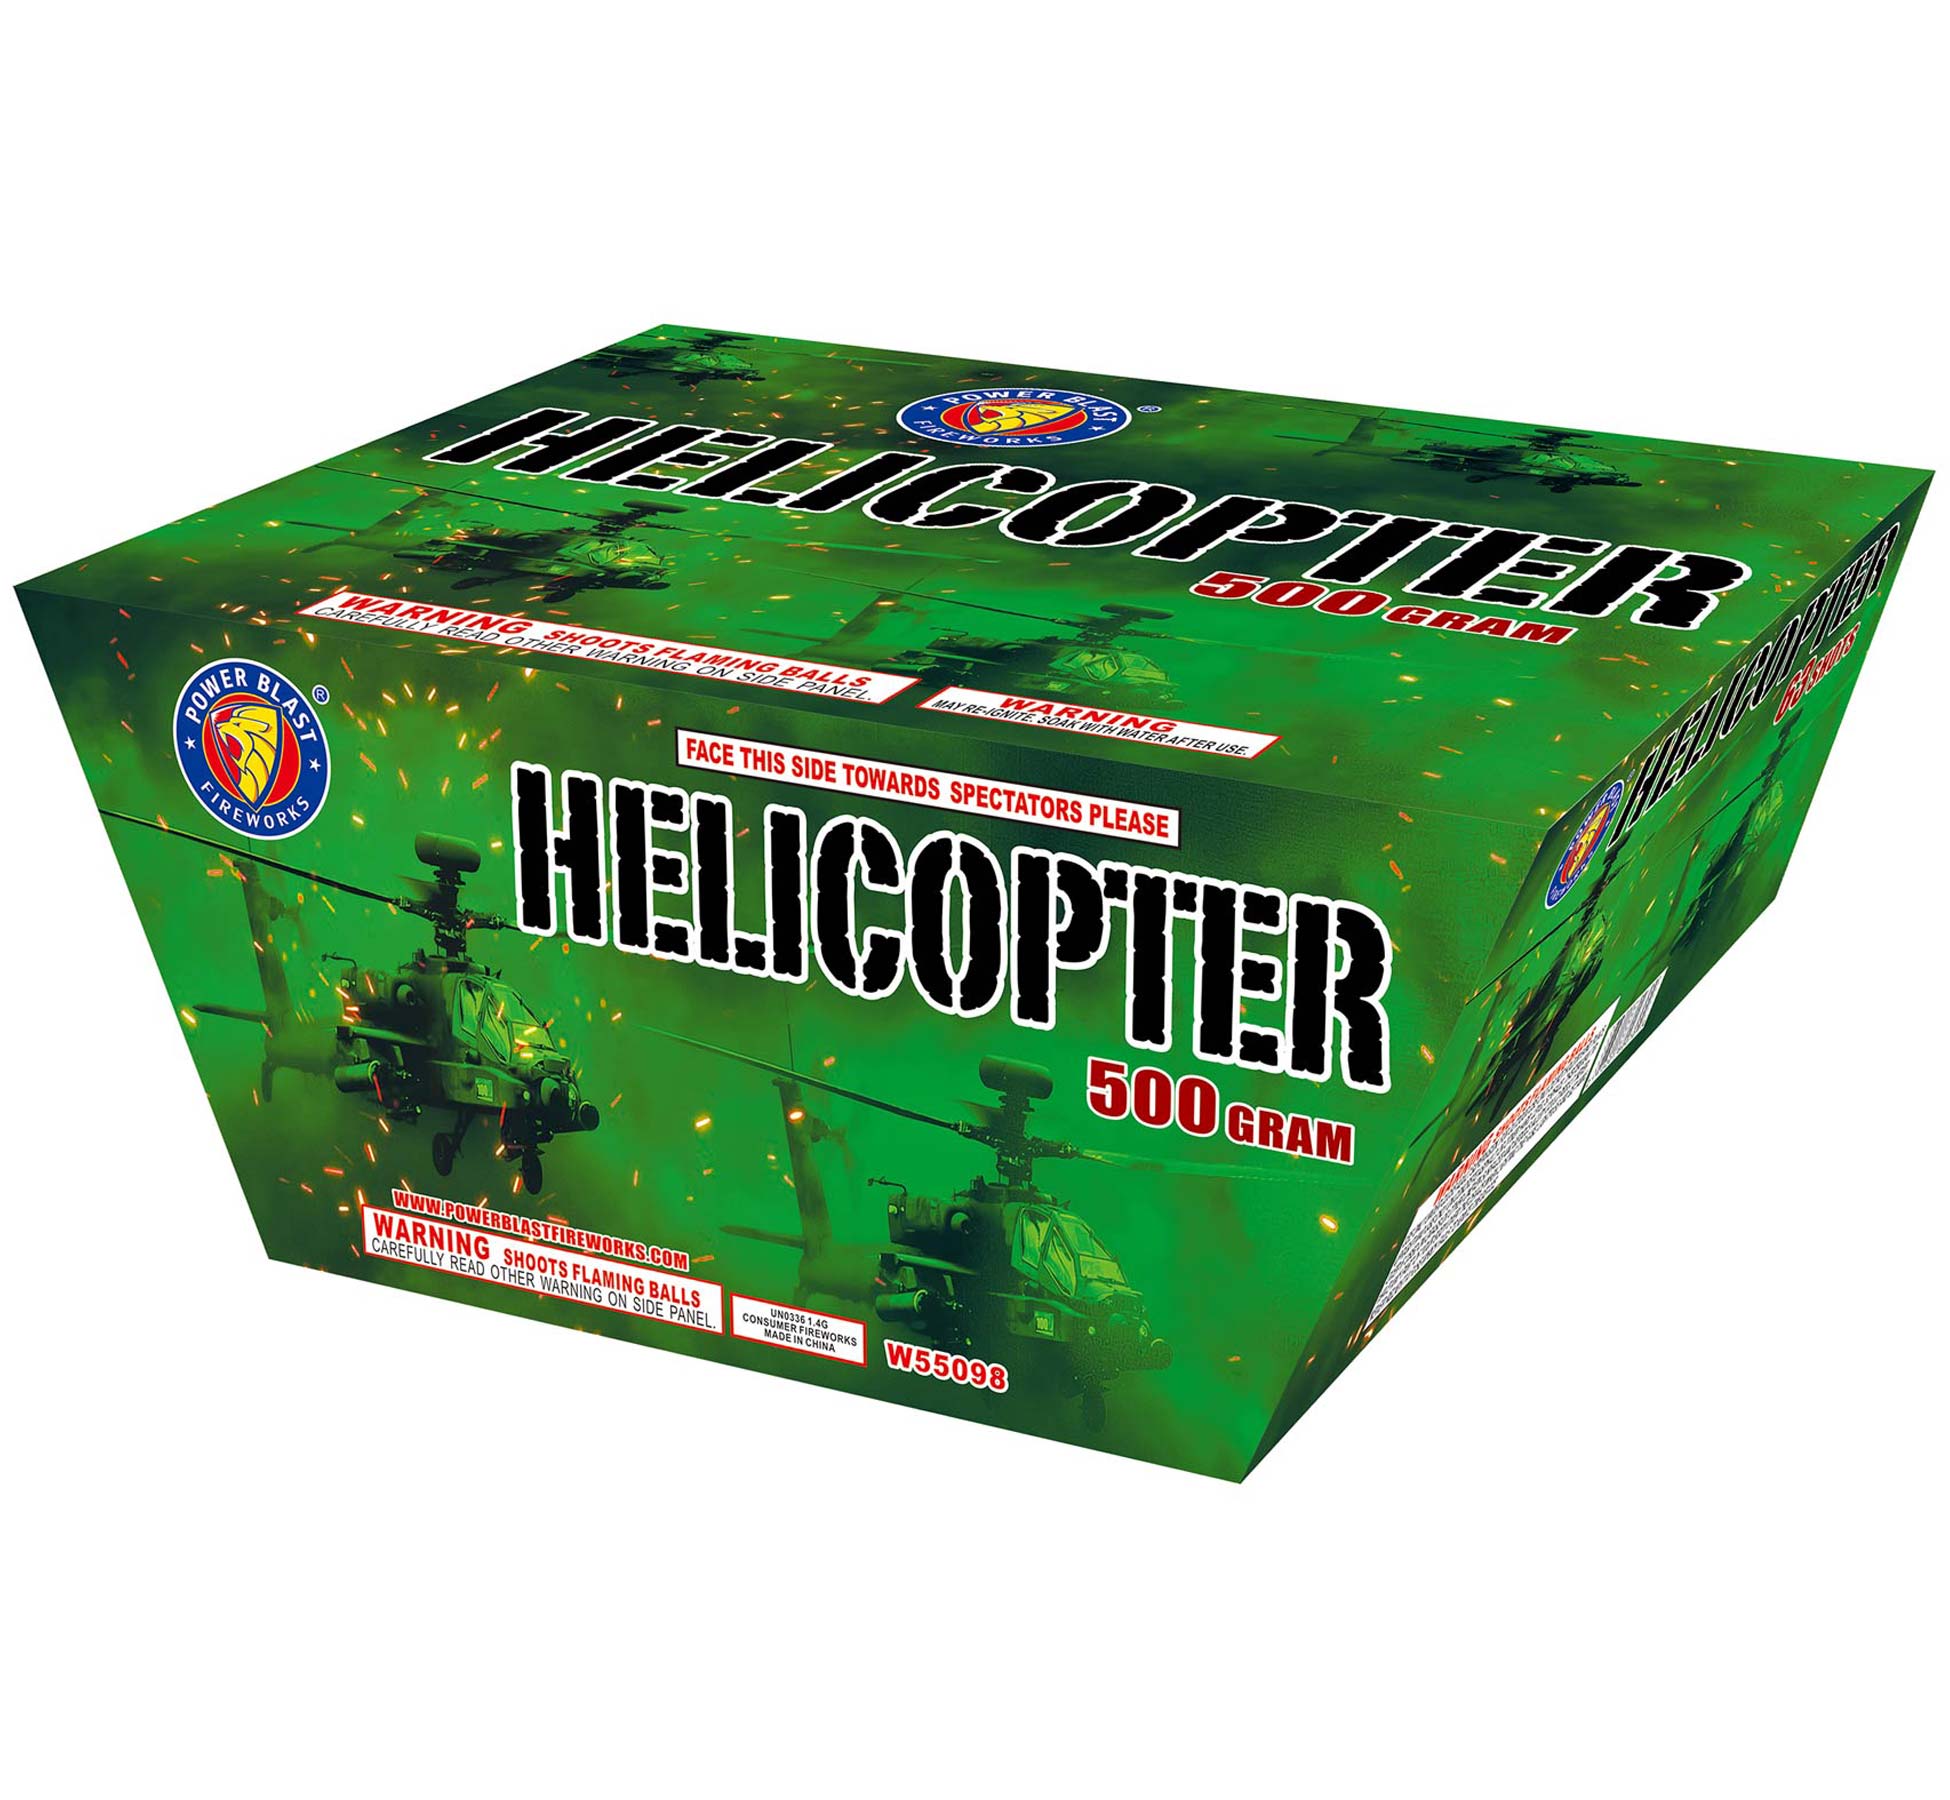 W55098 Helicopter